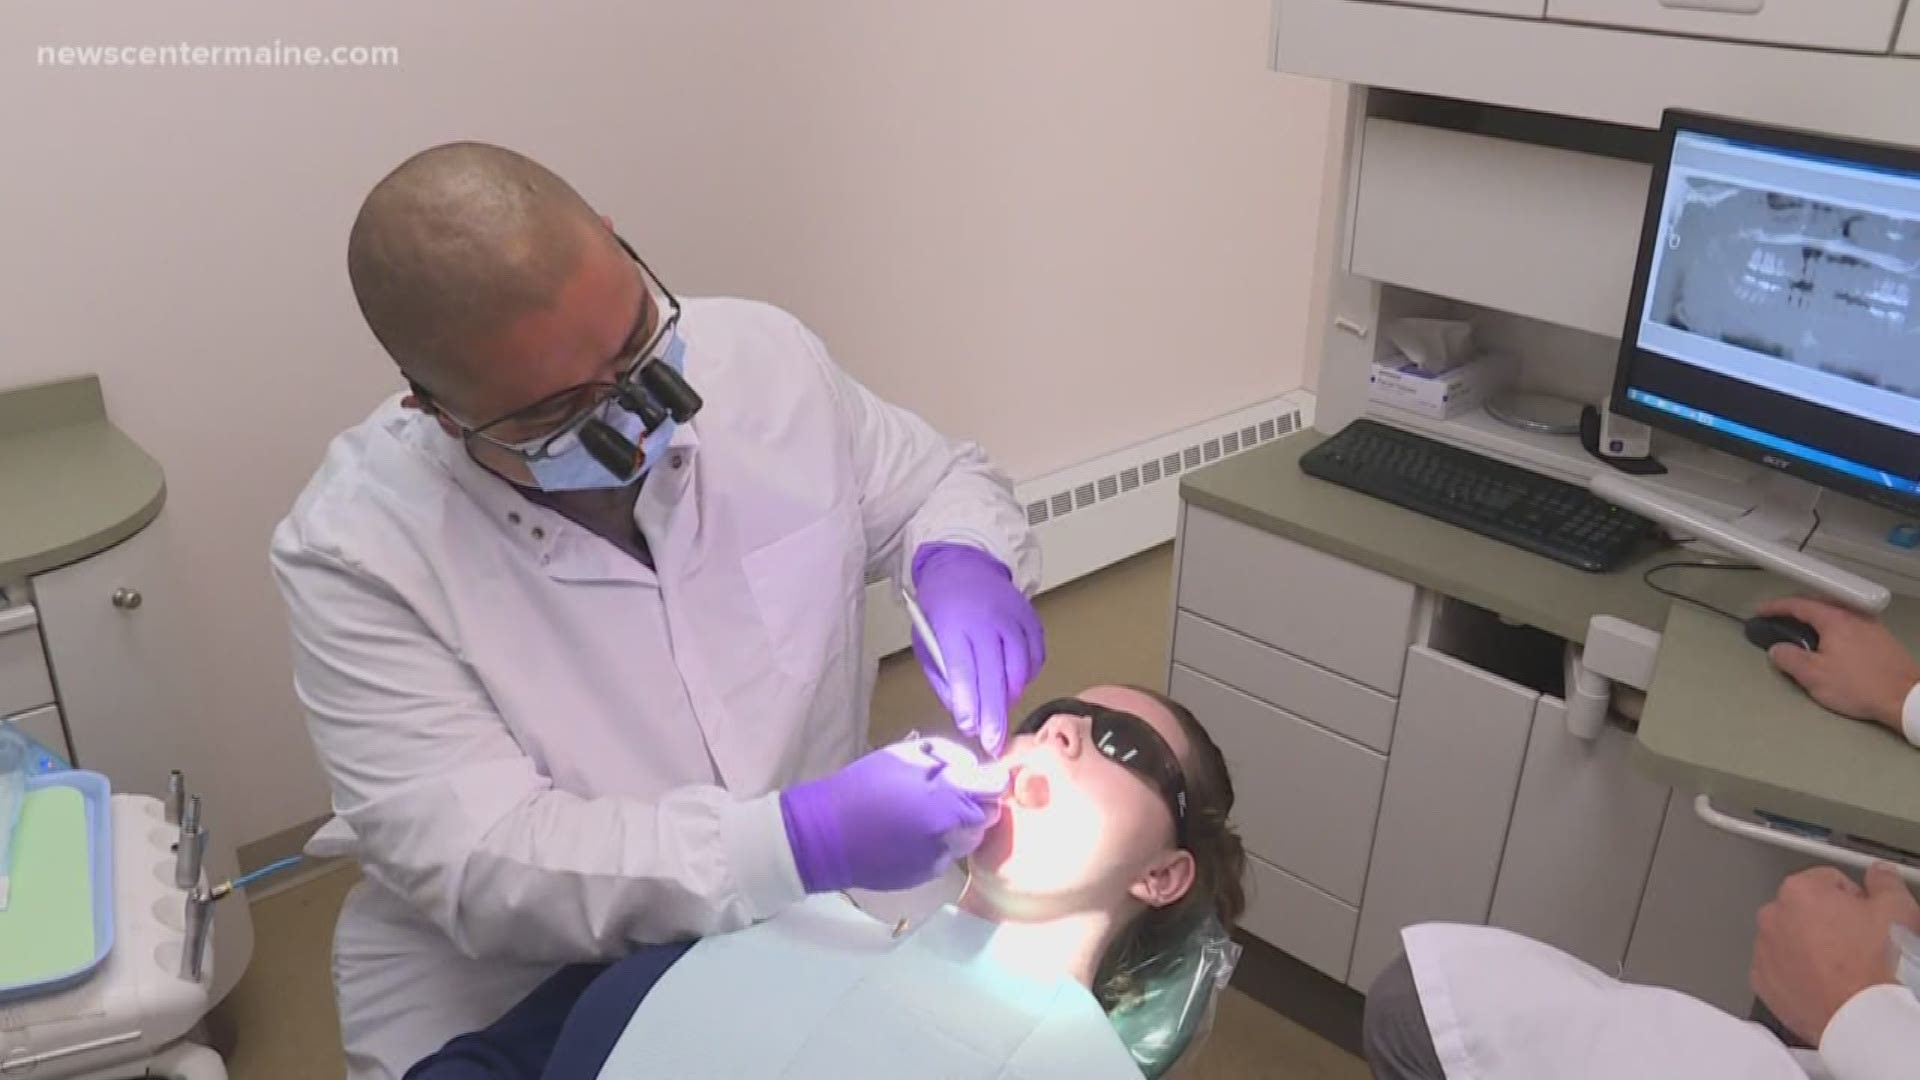 A PROGRAM THAT GIVES DENTAL STUDENTS AN OPPORTUNITY TO PRACTICE AT DENTAL CLINICS IS HELPING KEEP SOME THOSE DENTISTS IN RURAL MAINE